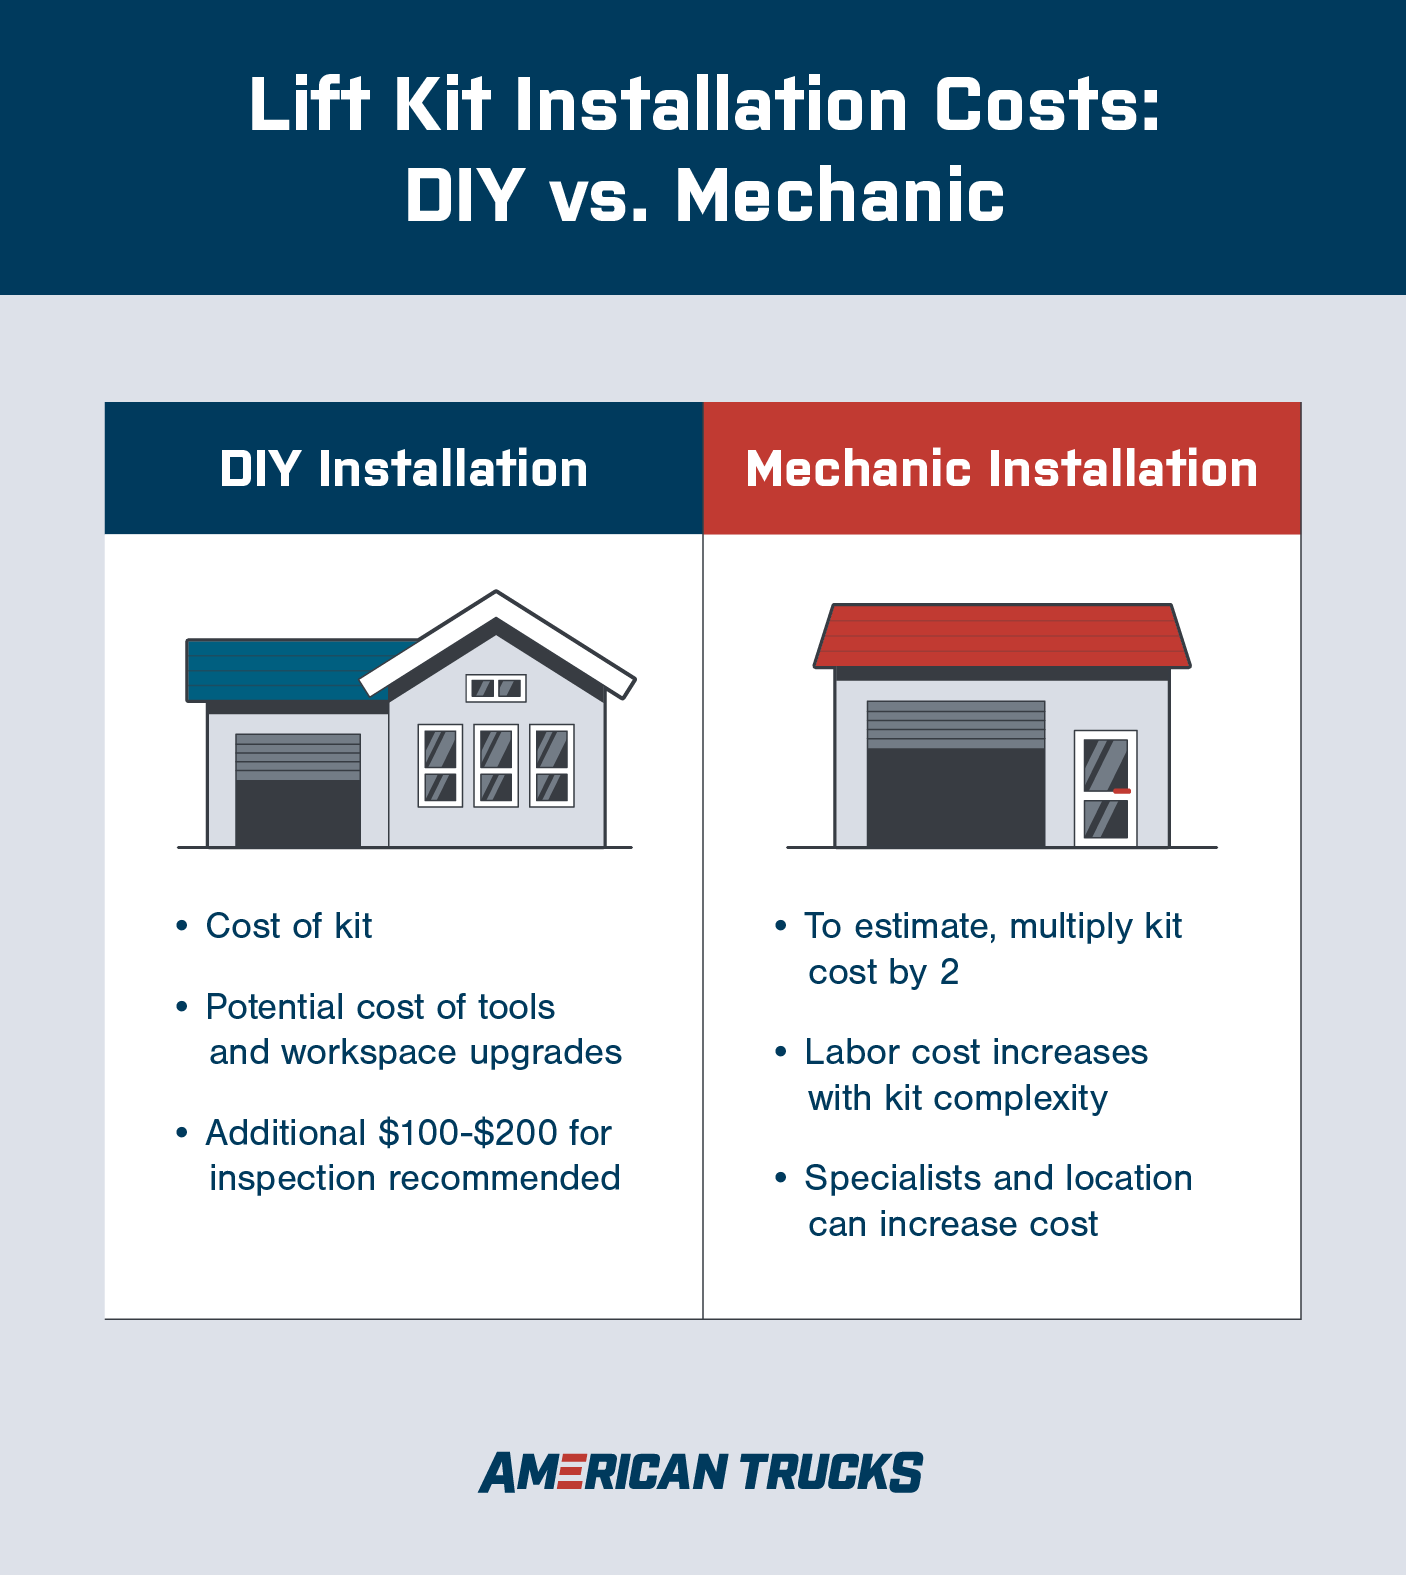 Lift kit installation cost chart comparing DIY and mechanic installation